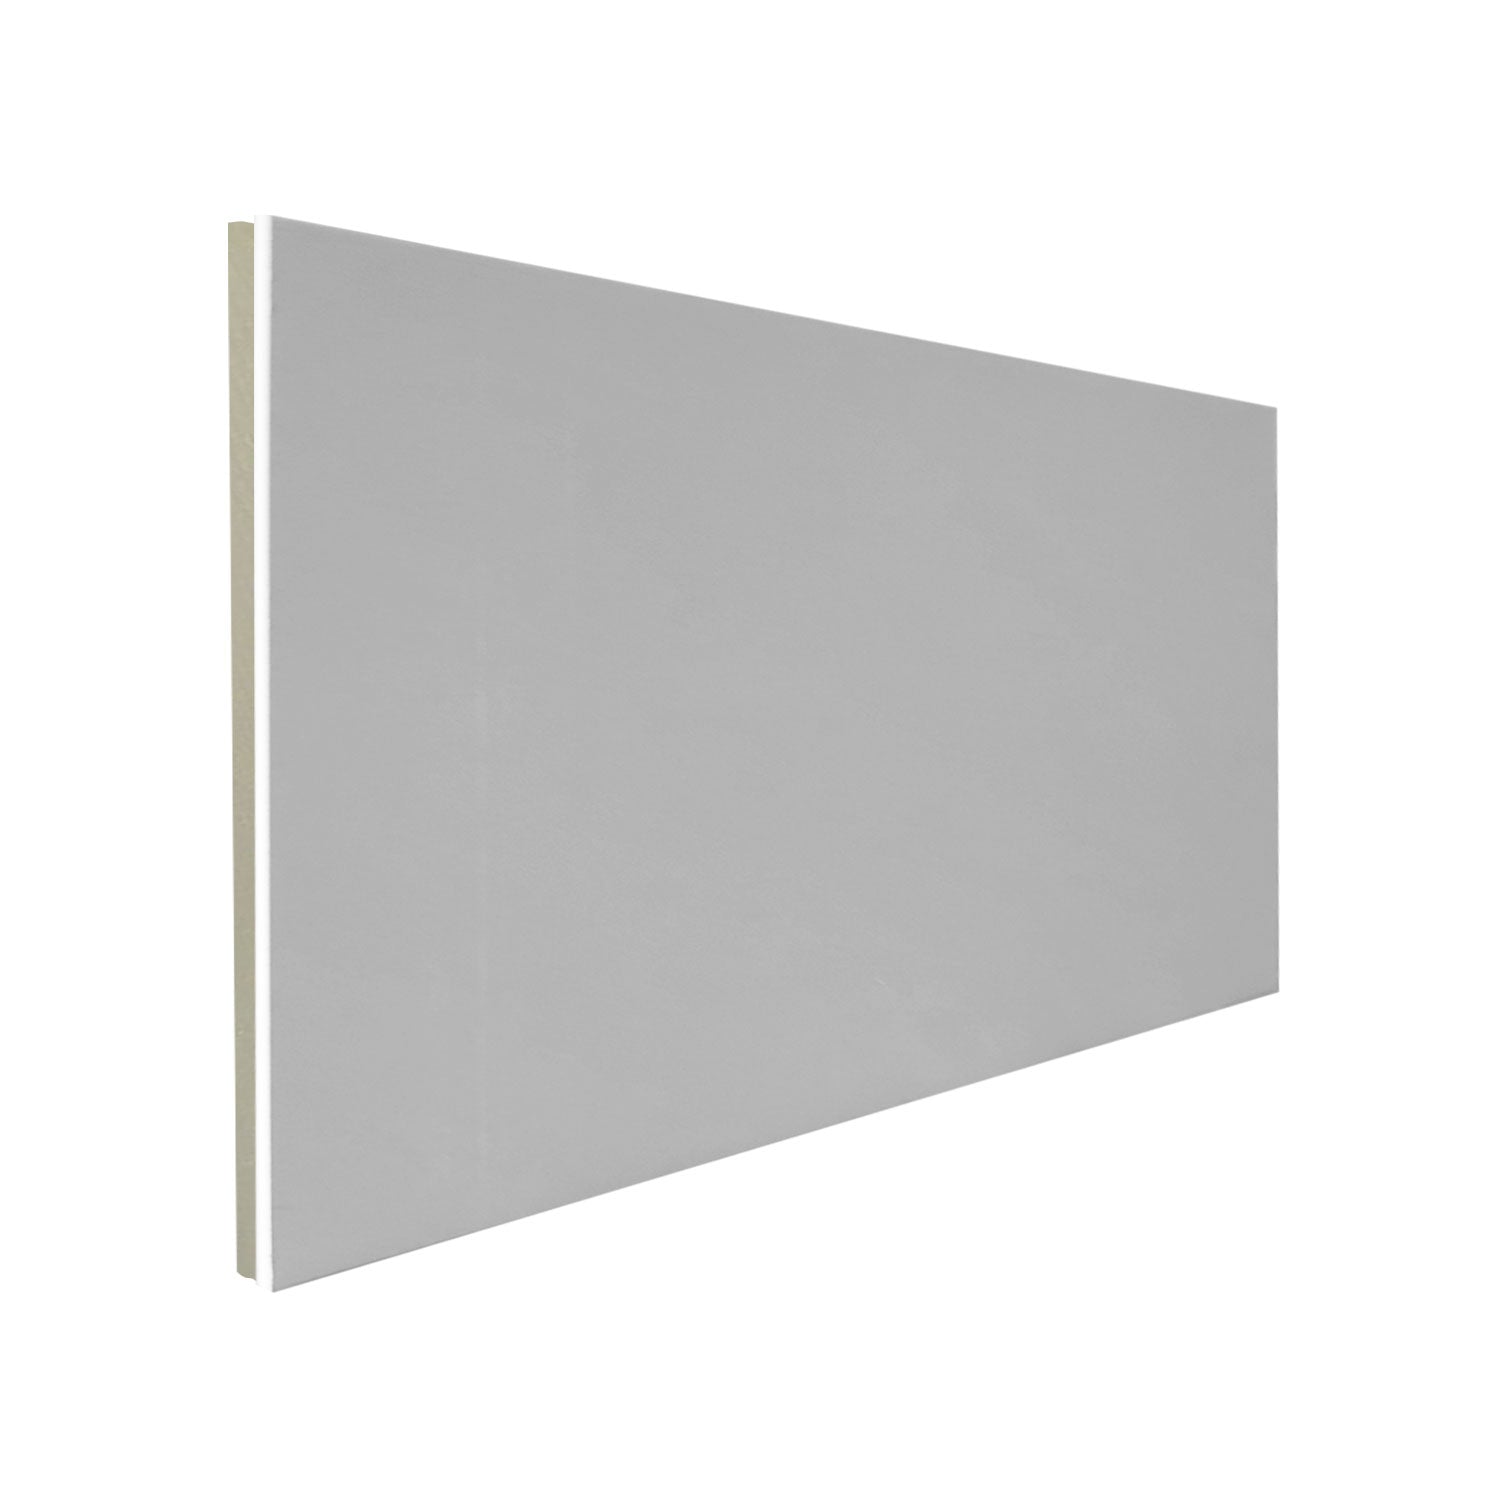 Thermal Check Plasterboard 8' x 4' x 50mm